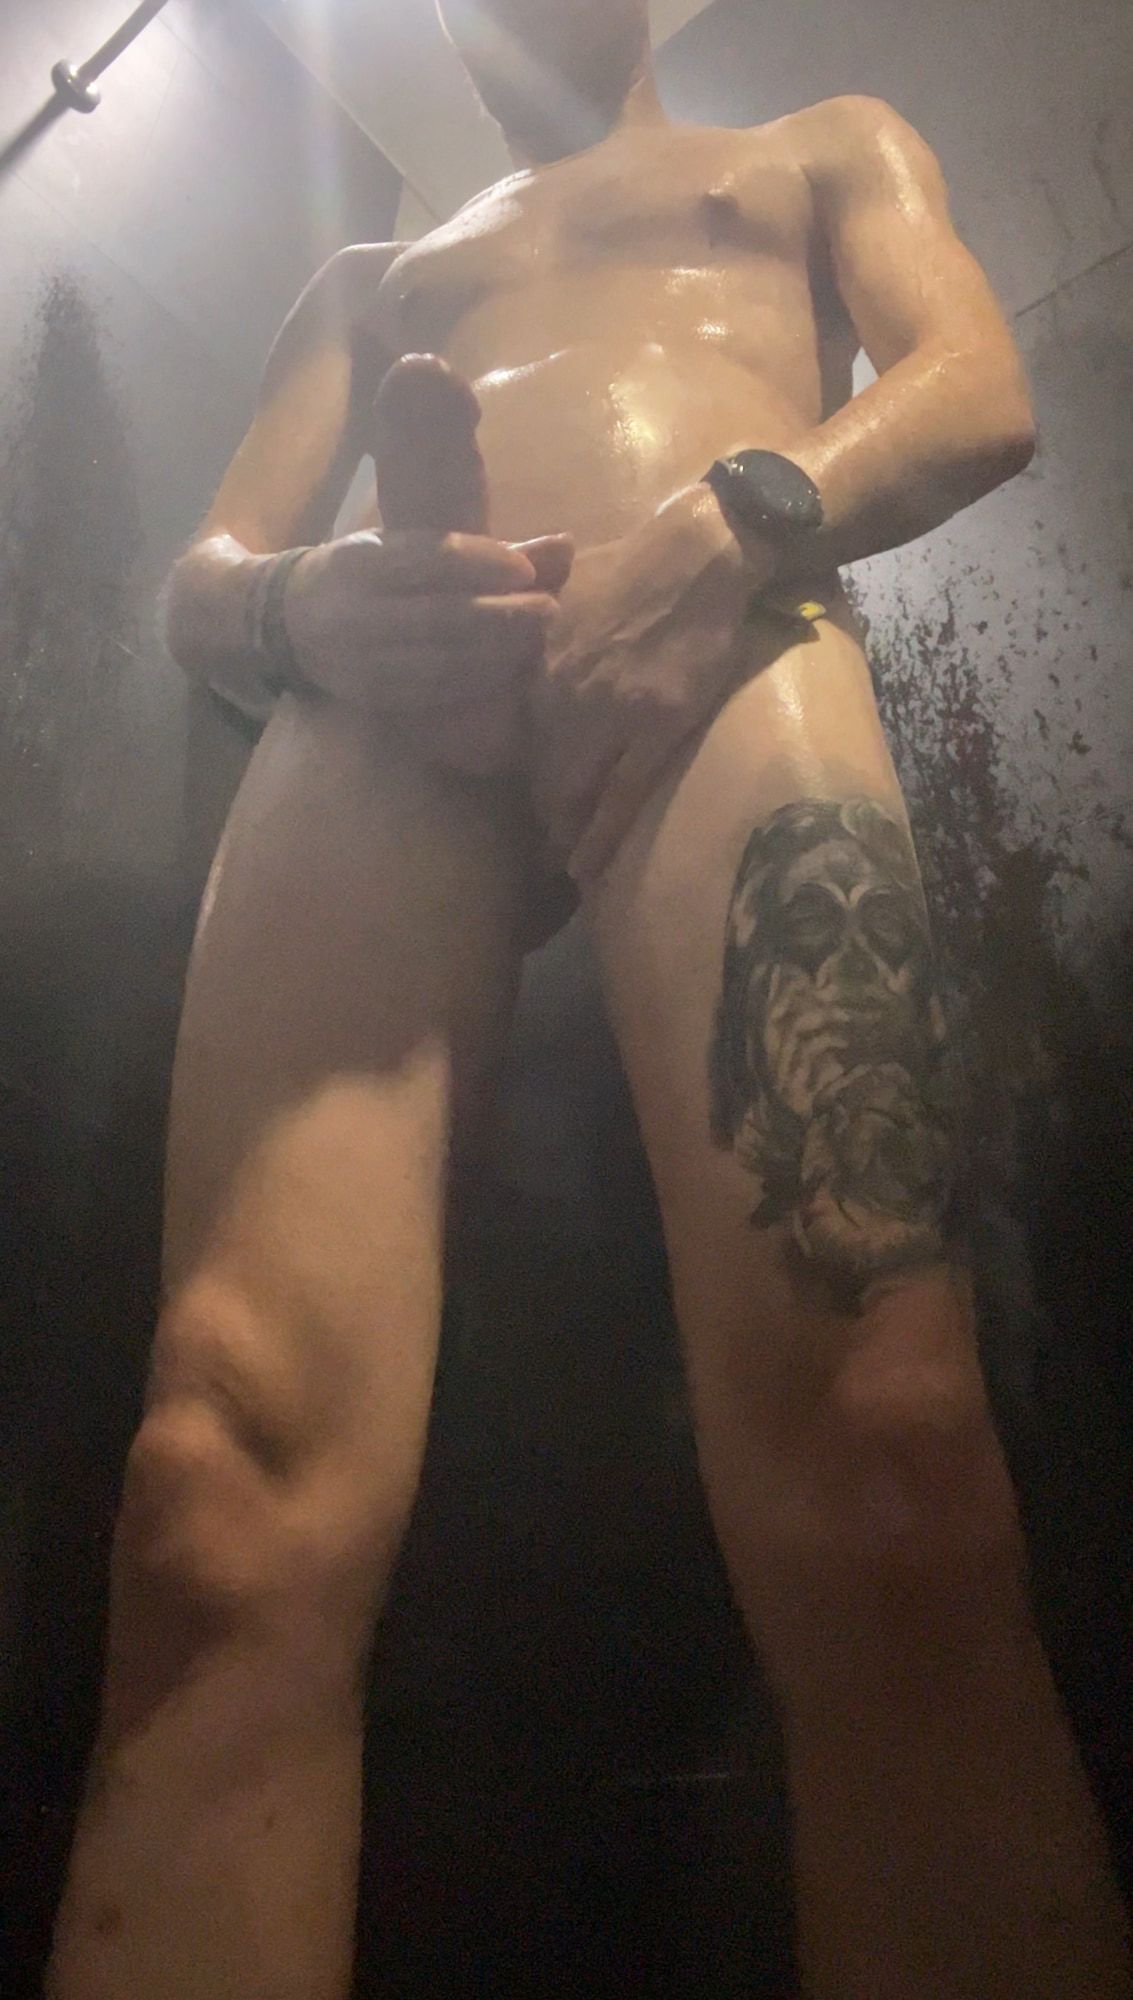 Shots playing on public showers at the gym #10